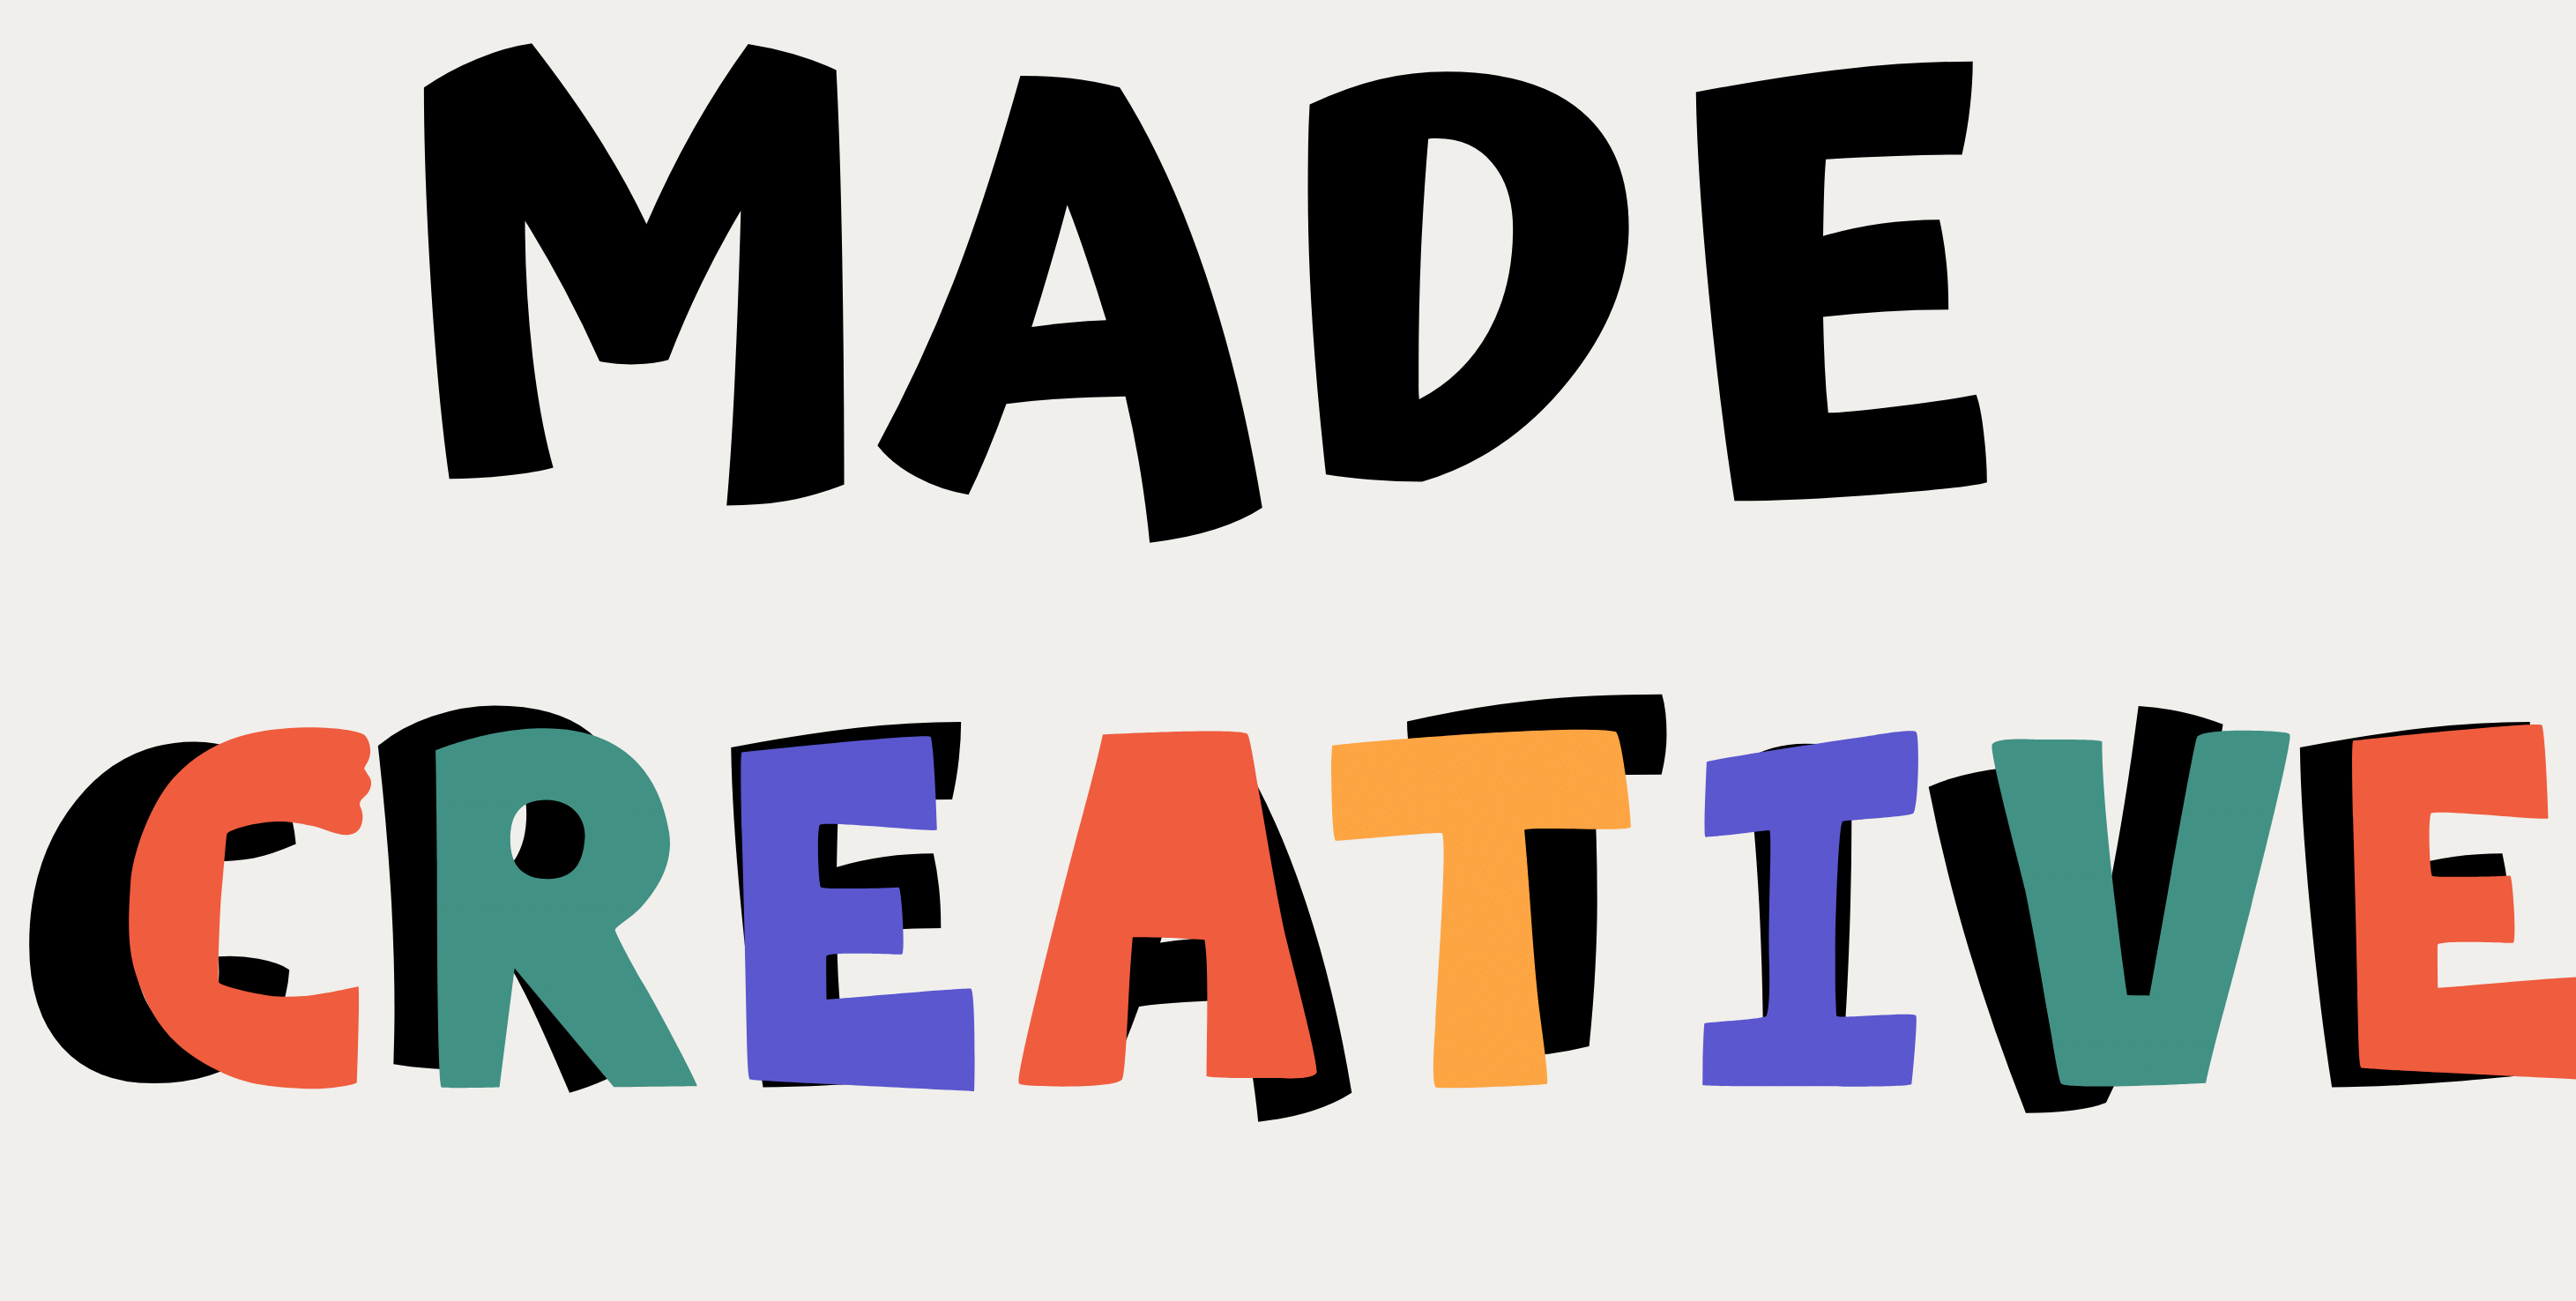 Made Creative: Navigating Your Creative Journey (Together)